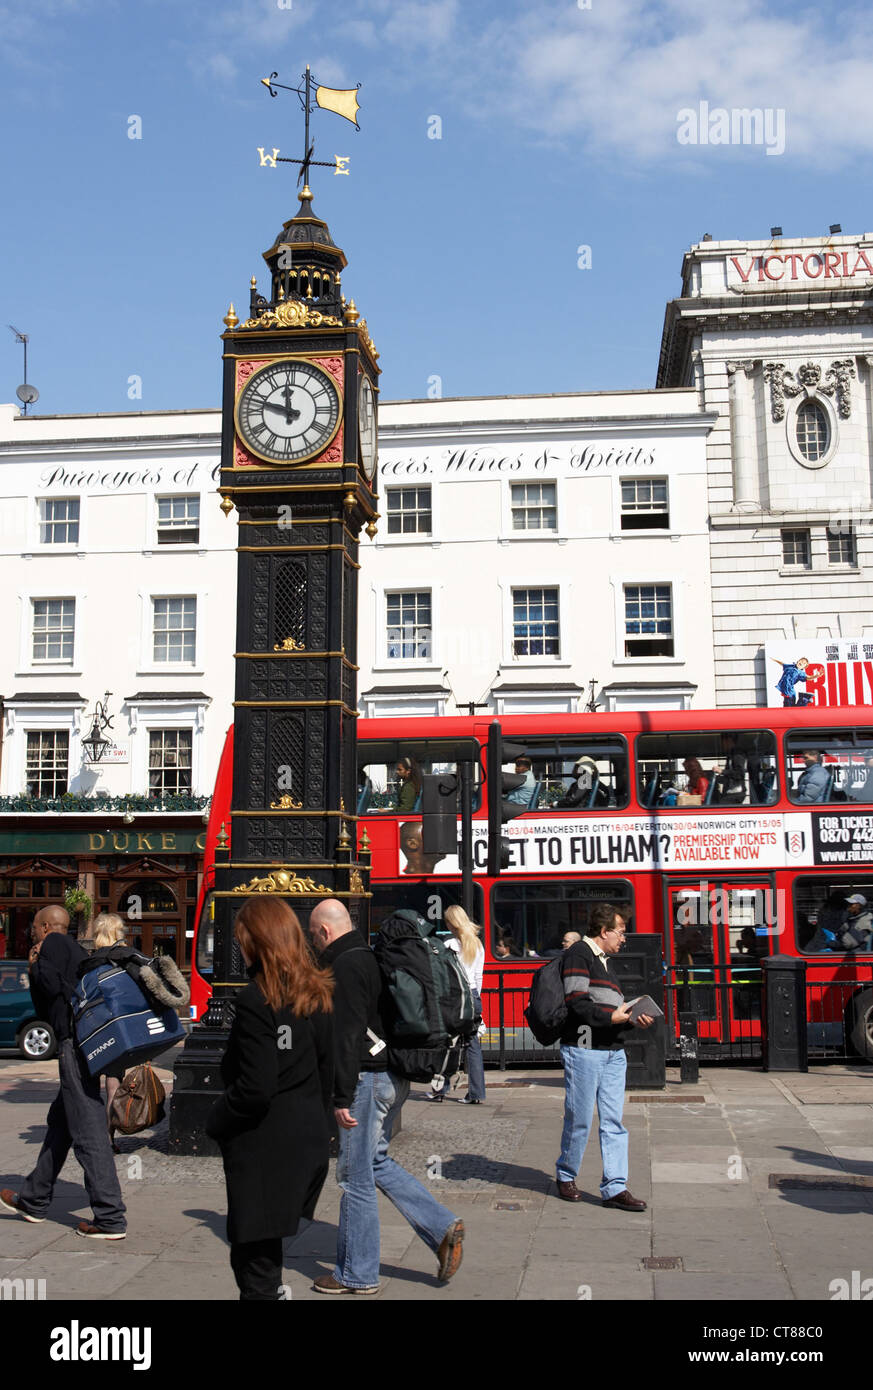 London - replica of Big Ben on a place in the City Stock Photo